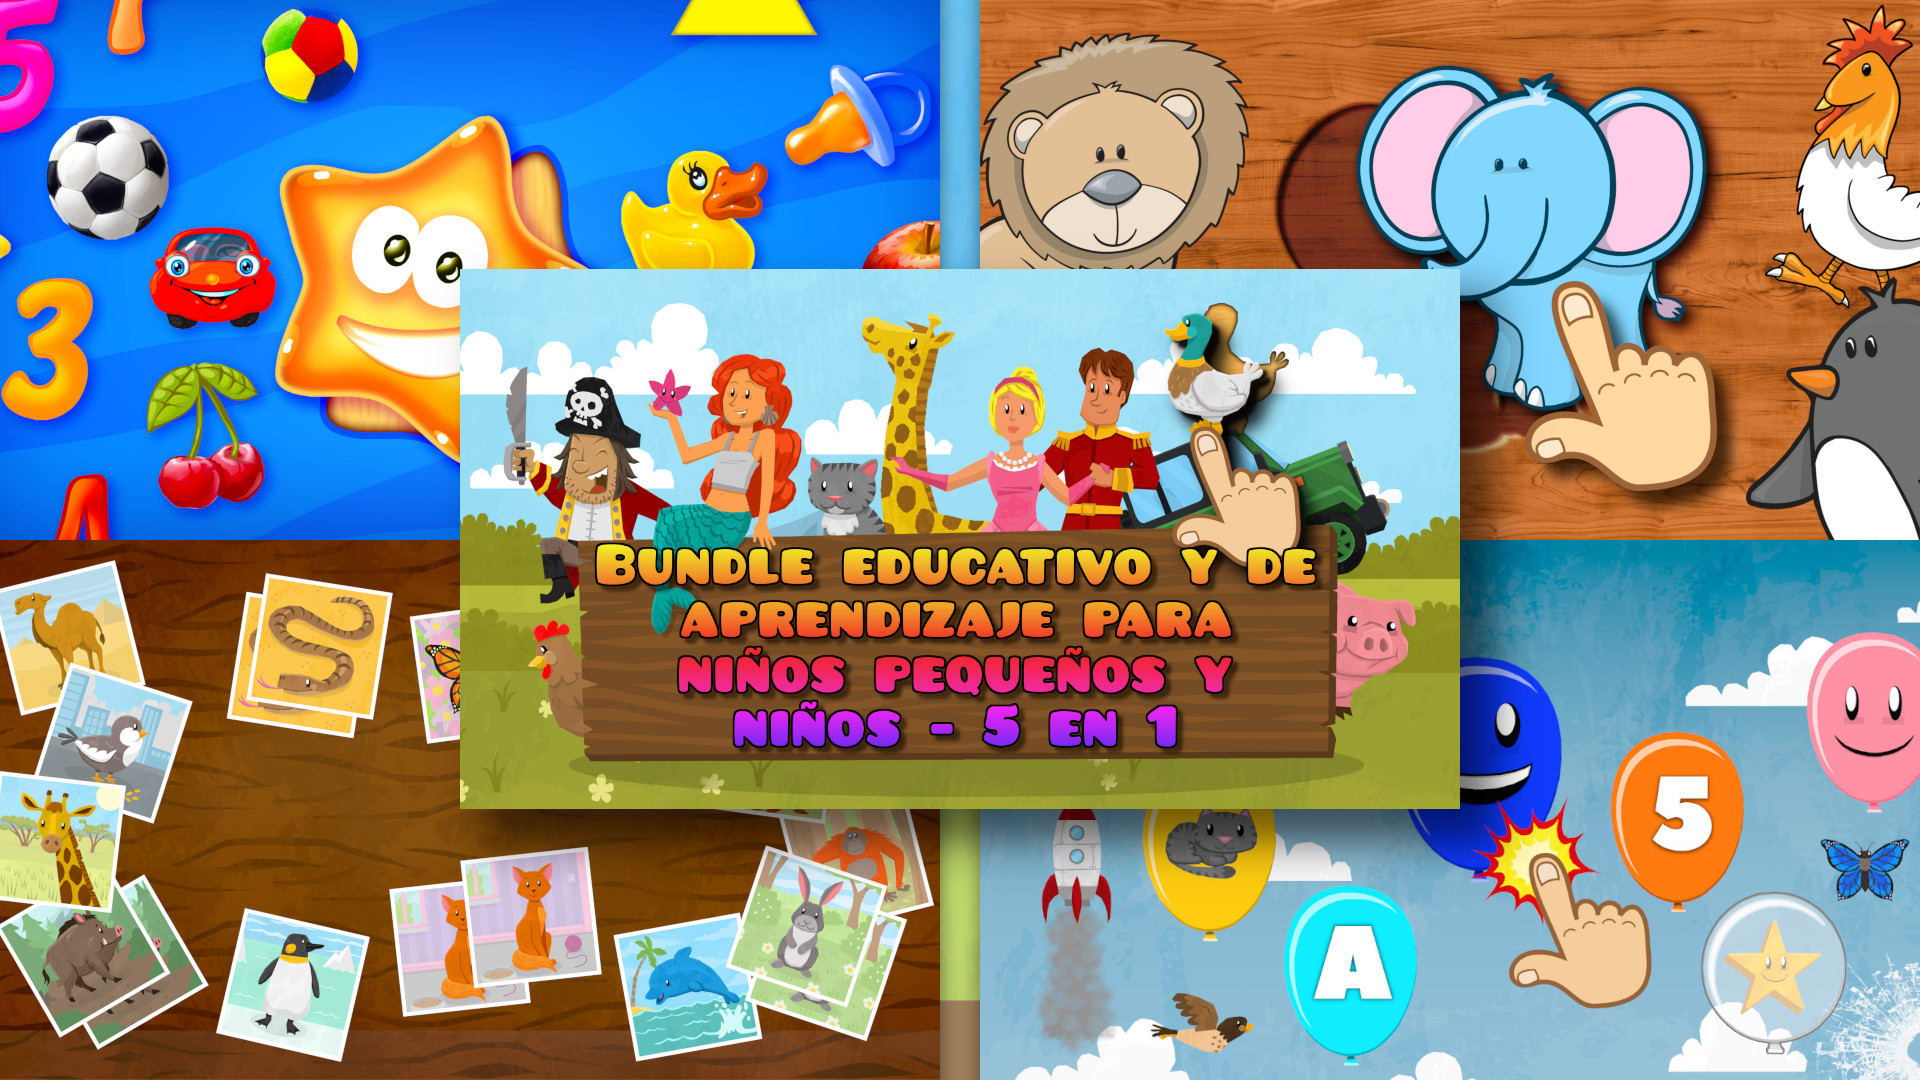 Educational and Learning Bundle for Toddlers and Kids - 5 in 1 1